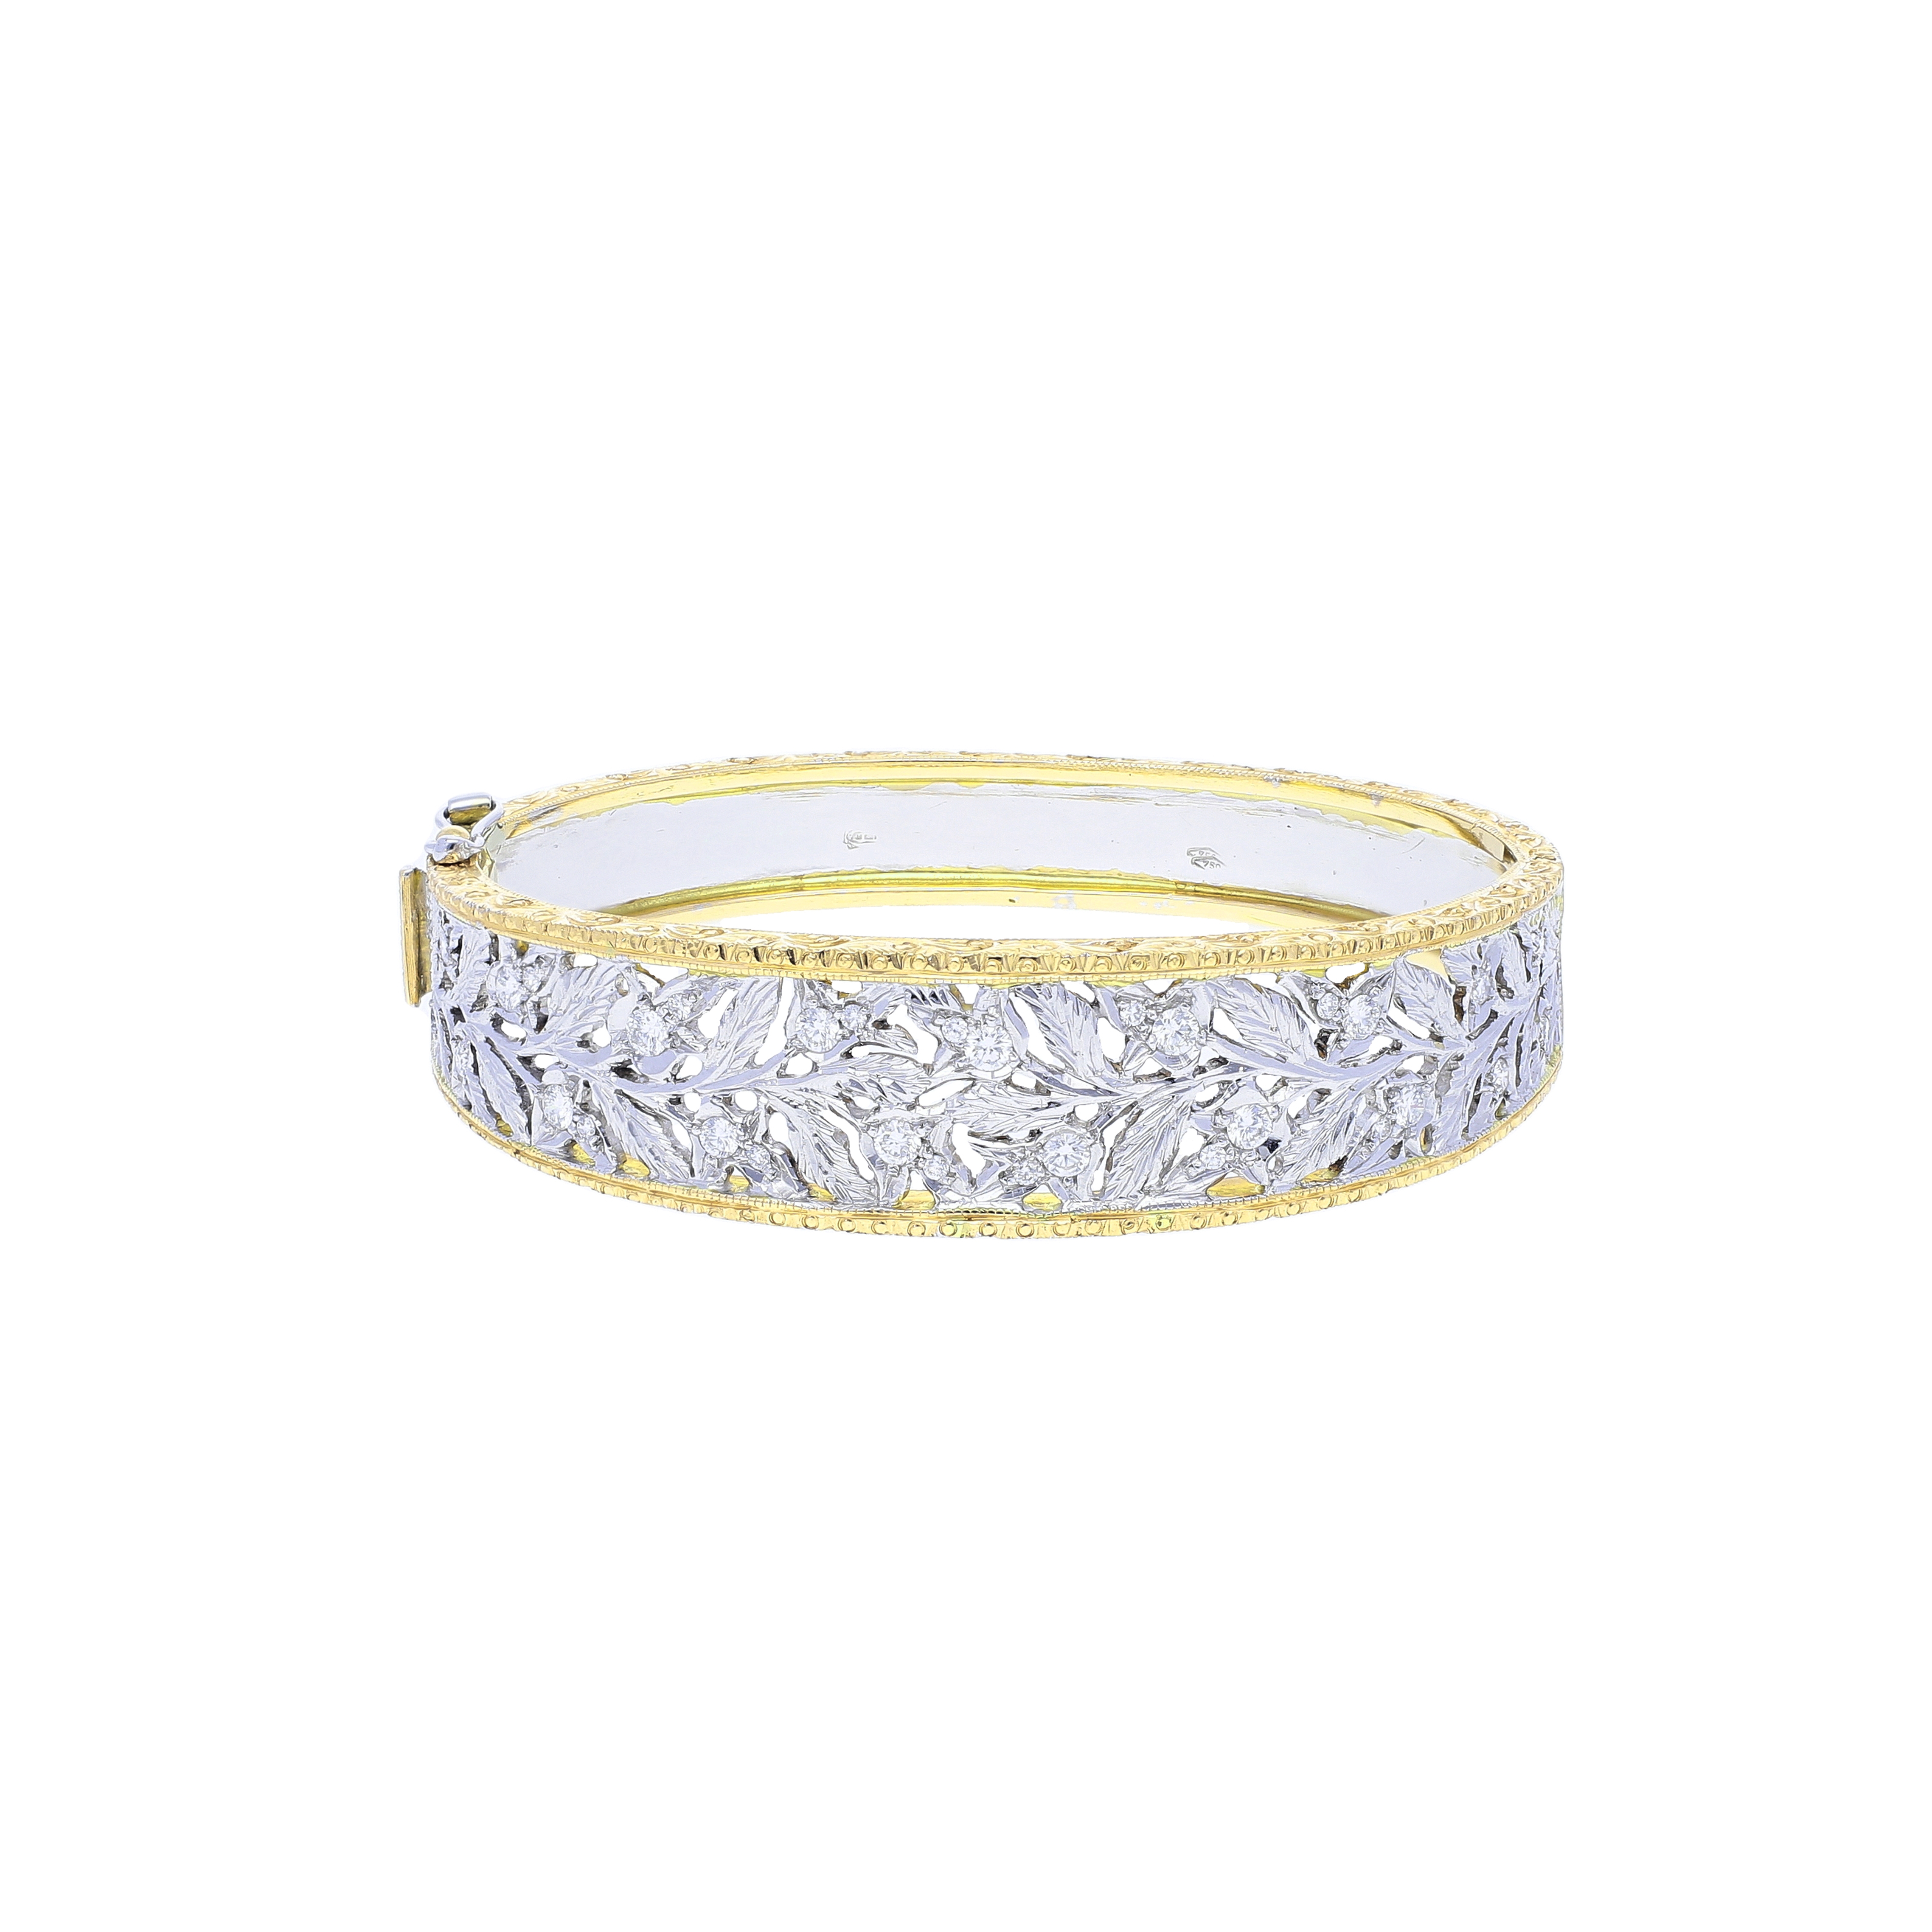 Traditional florentine bangle bracelet in 18kt yellow and white gold with diamonds